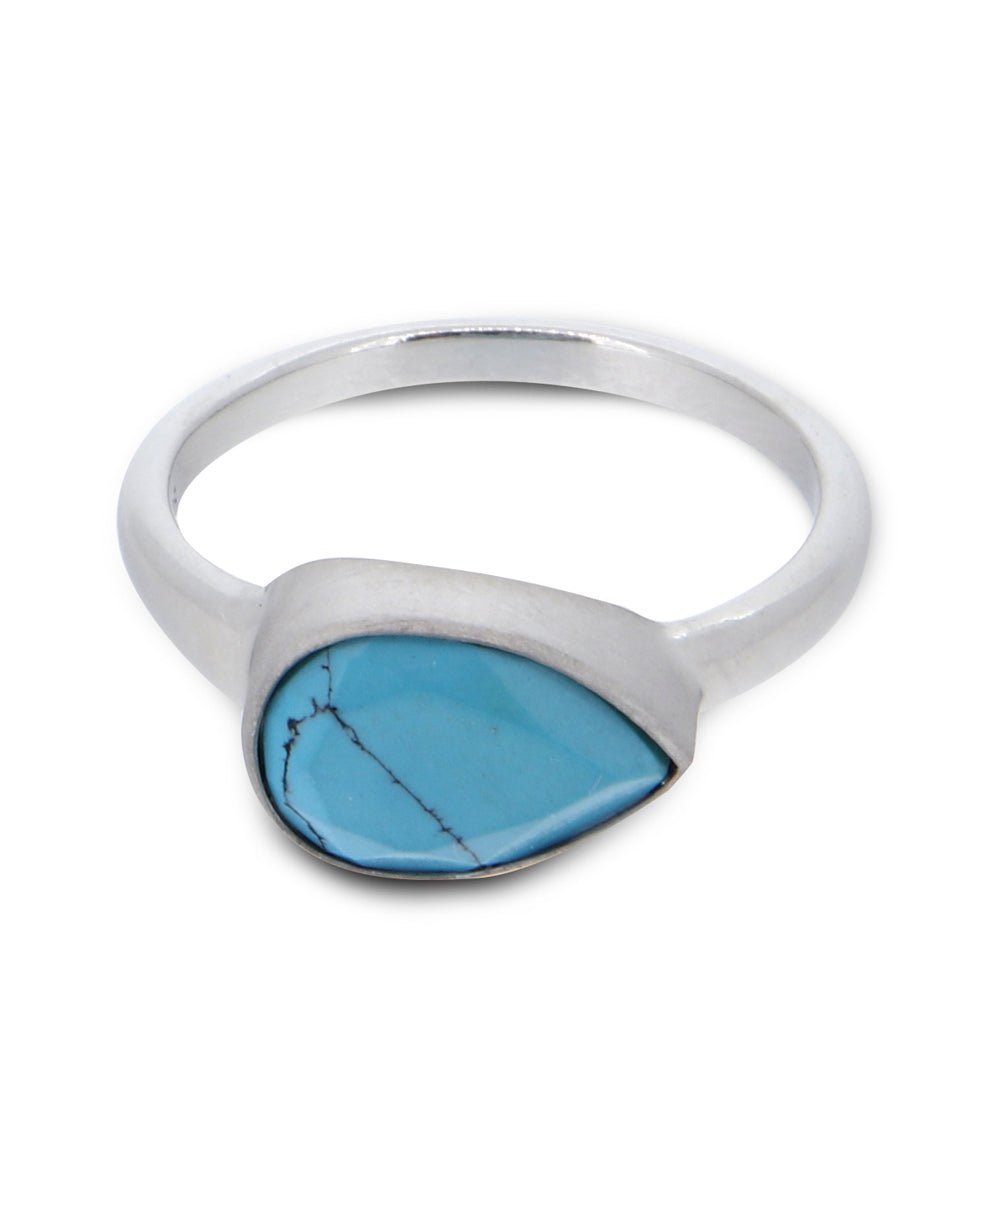 Turquoise Teardrop Shaped Gemstone Sterling Ring - Rings Size 6